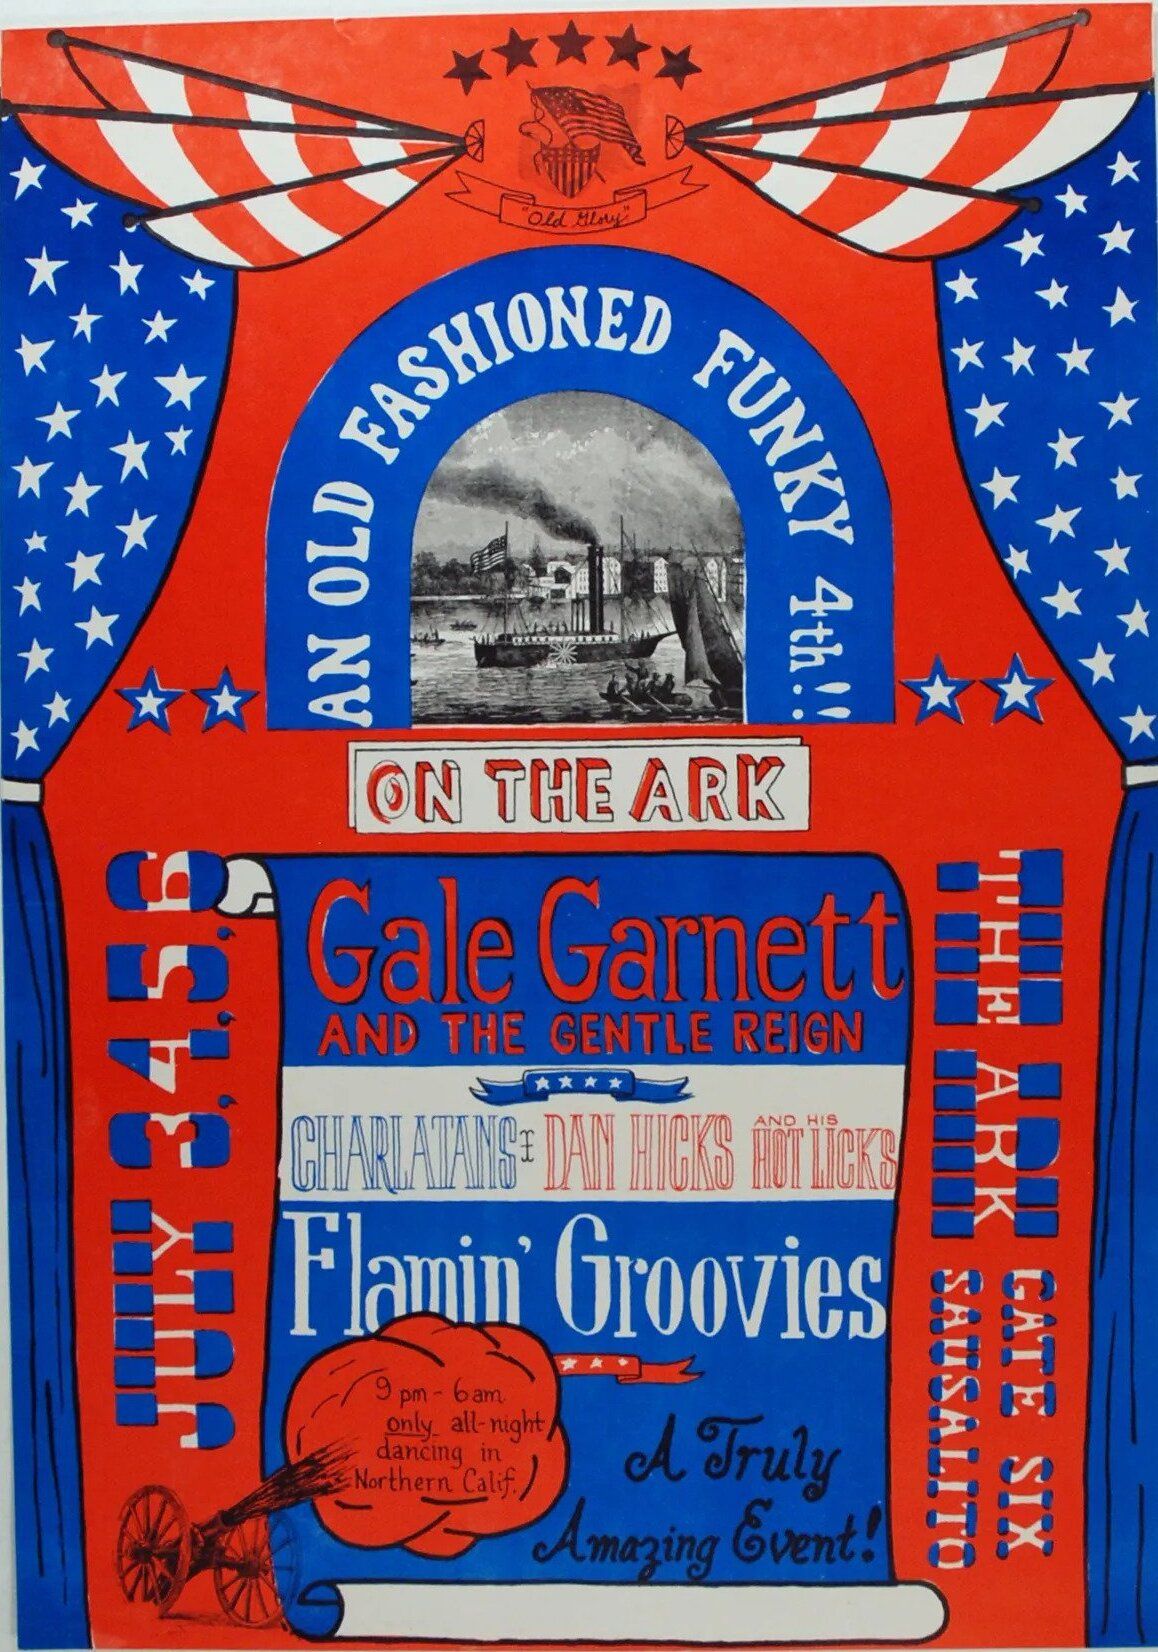 1969-The Ark-Flamin Groovies Concert Poster